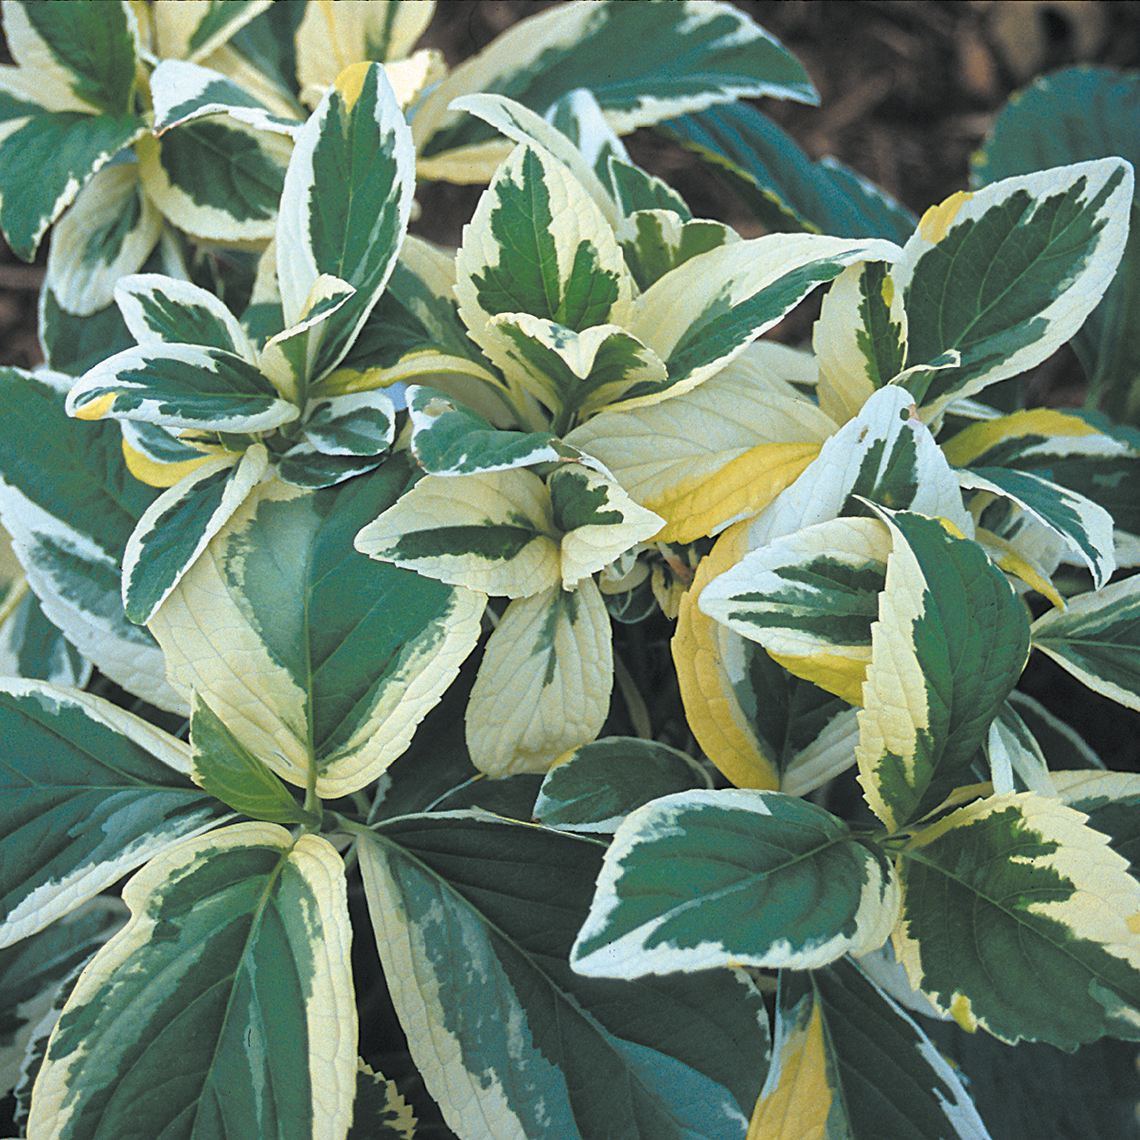 The unique white green and yellow variegated foliage of Lemon Wave hydrangea